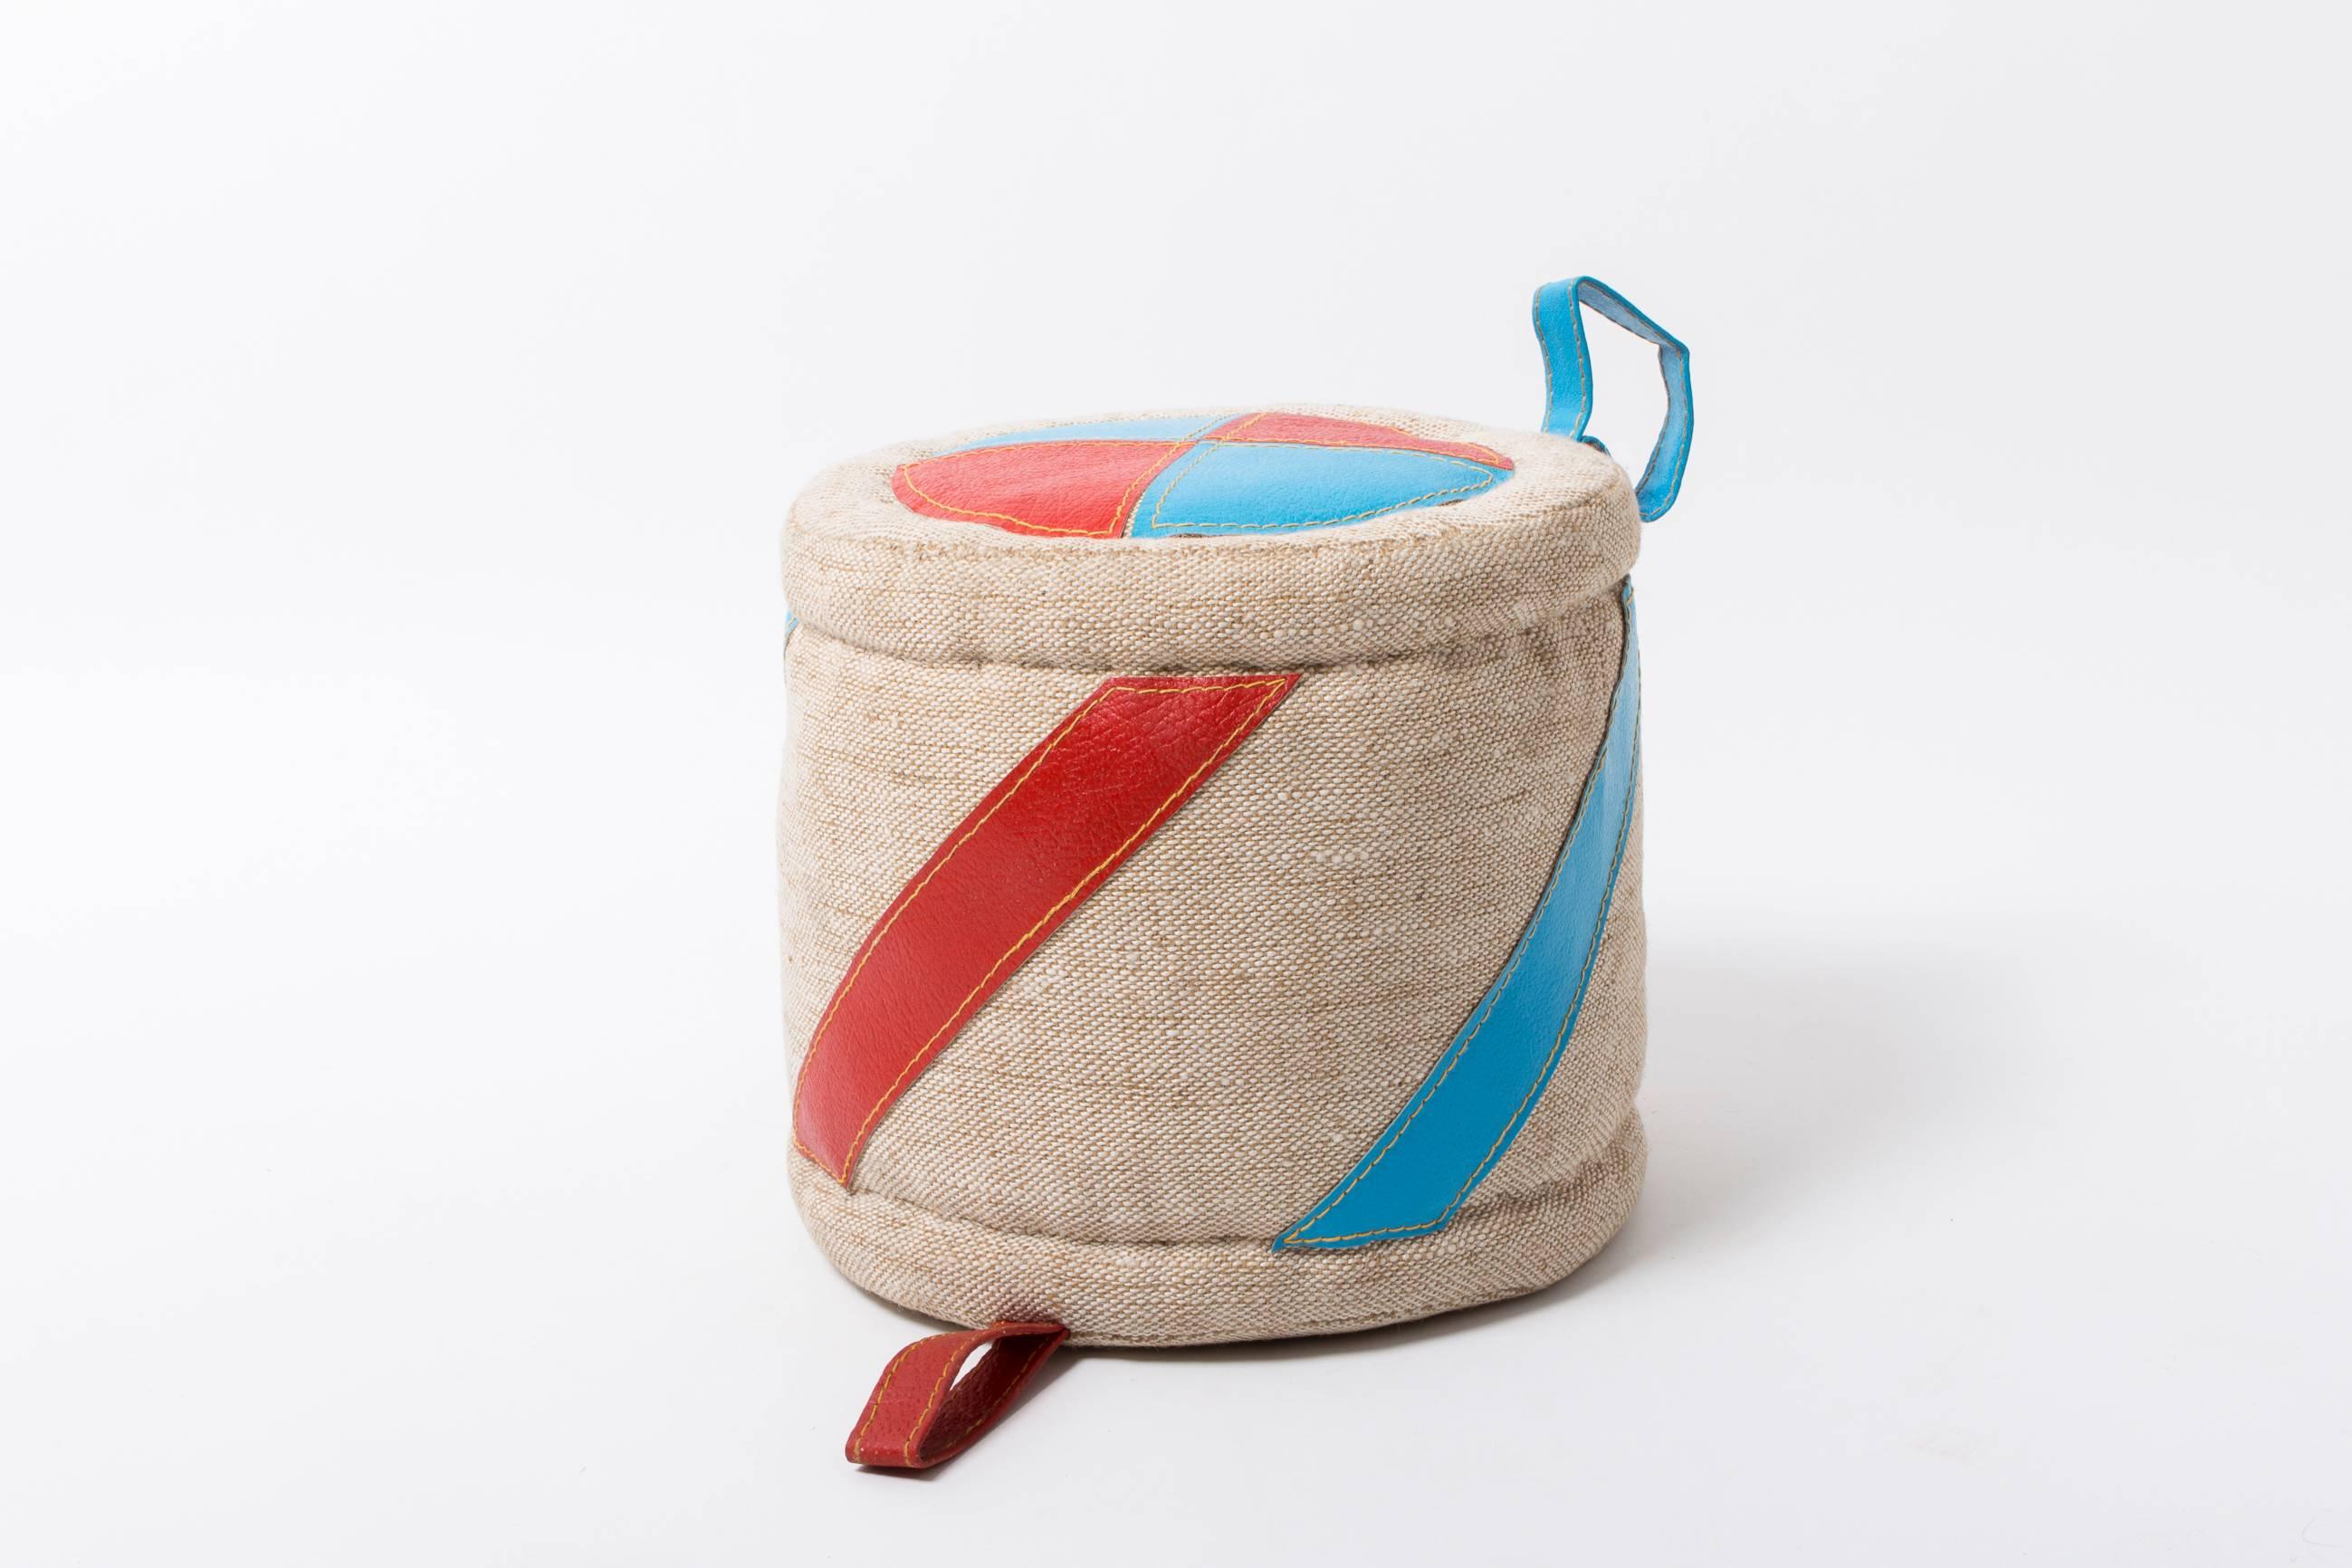 One of the typical jute and two colored leather seating cushion by Renate Müller. The presented cushion was made just before her retirement in 2009.

Please find our other listings of toys designed by Renate Müller.